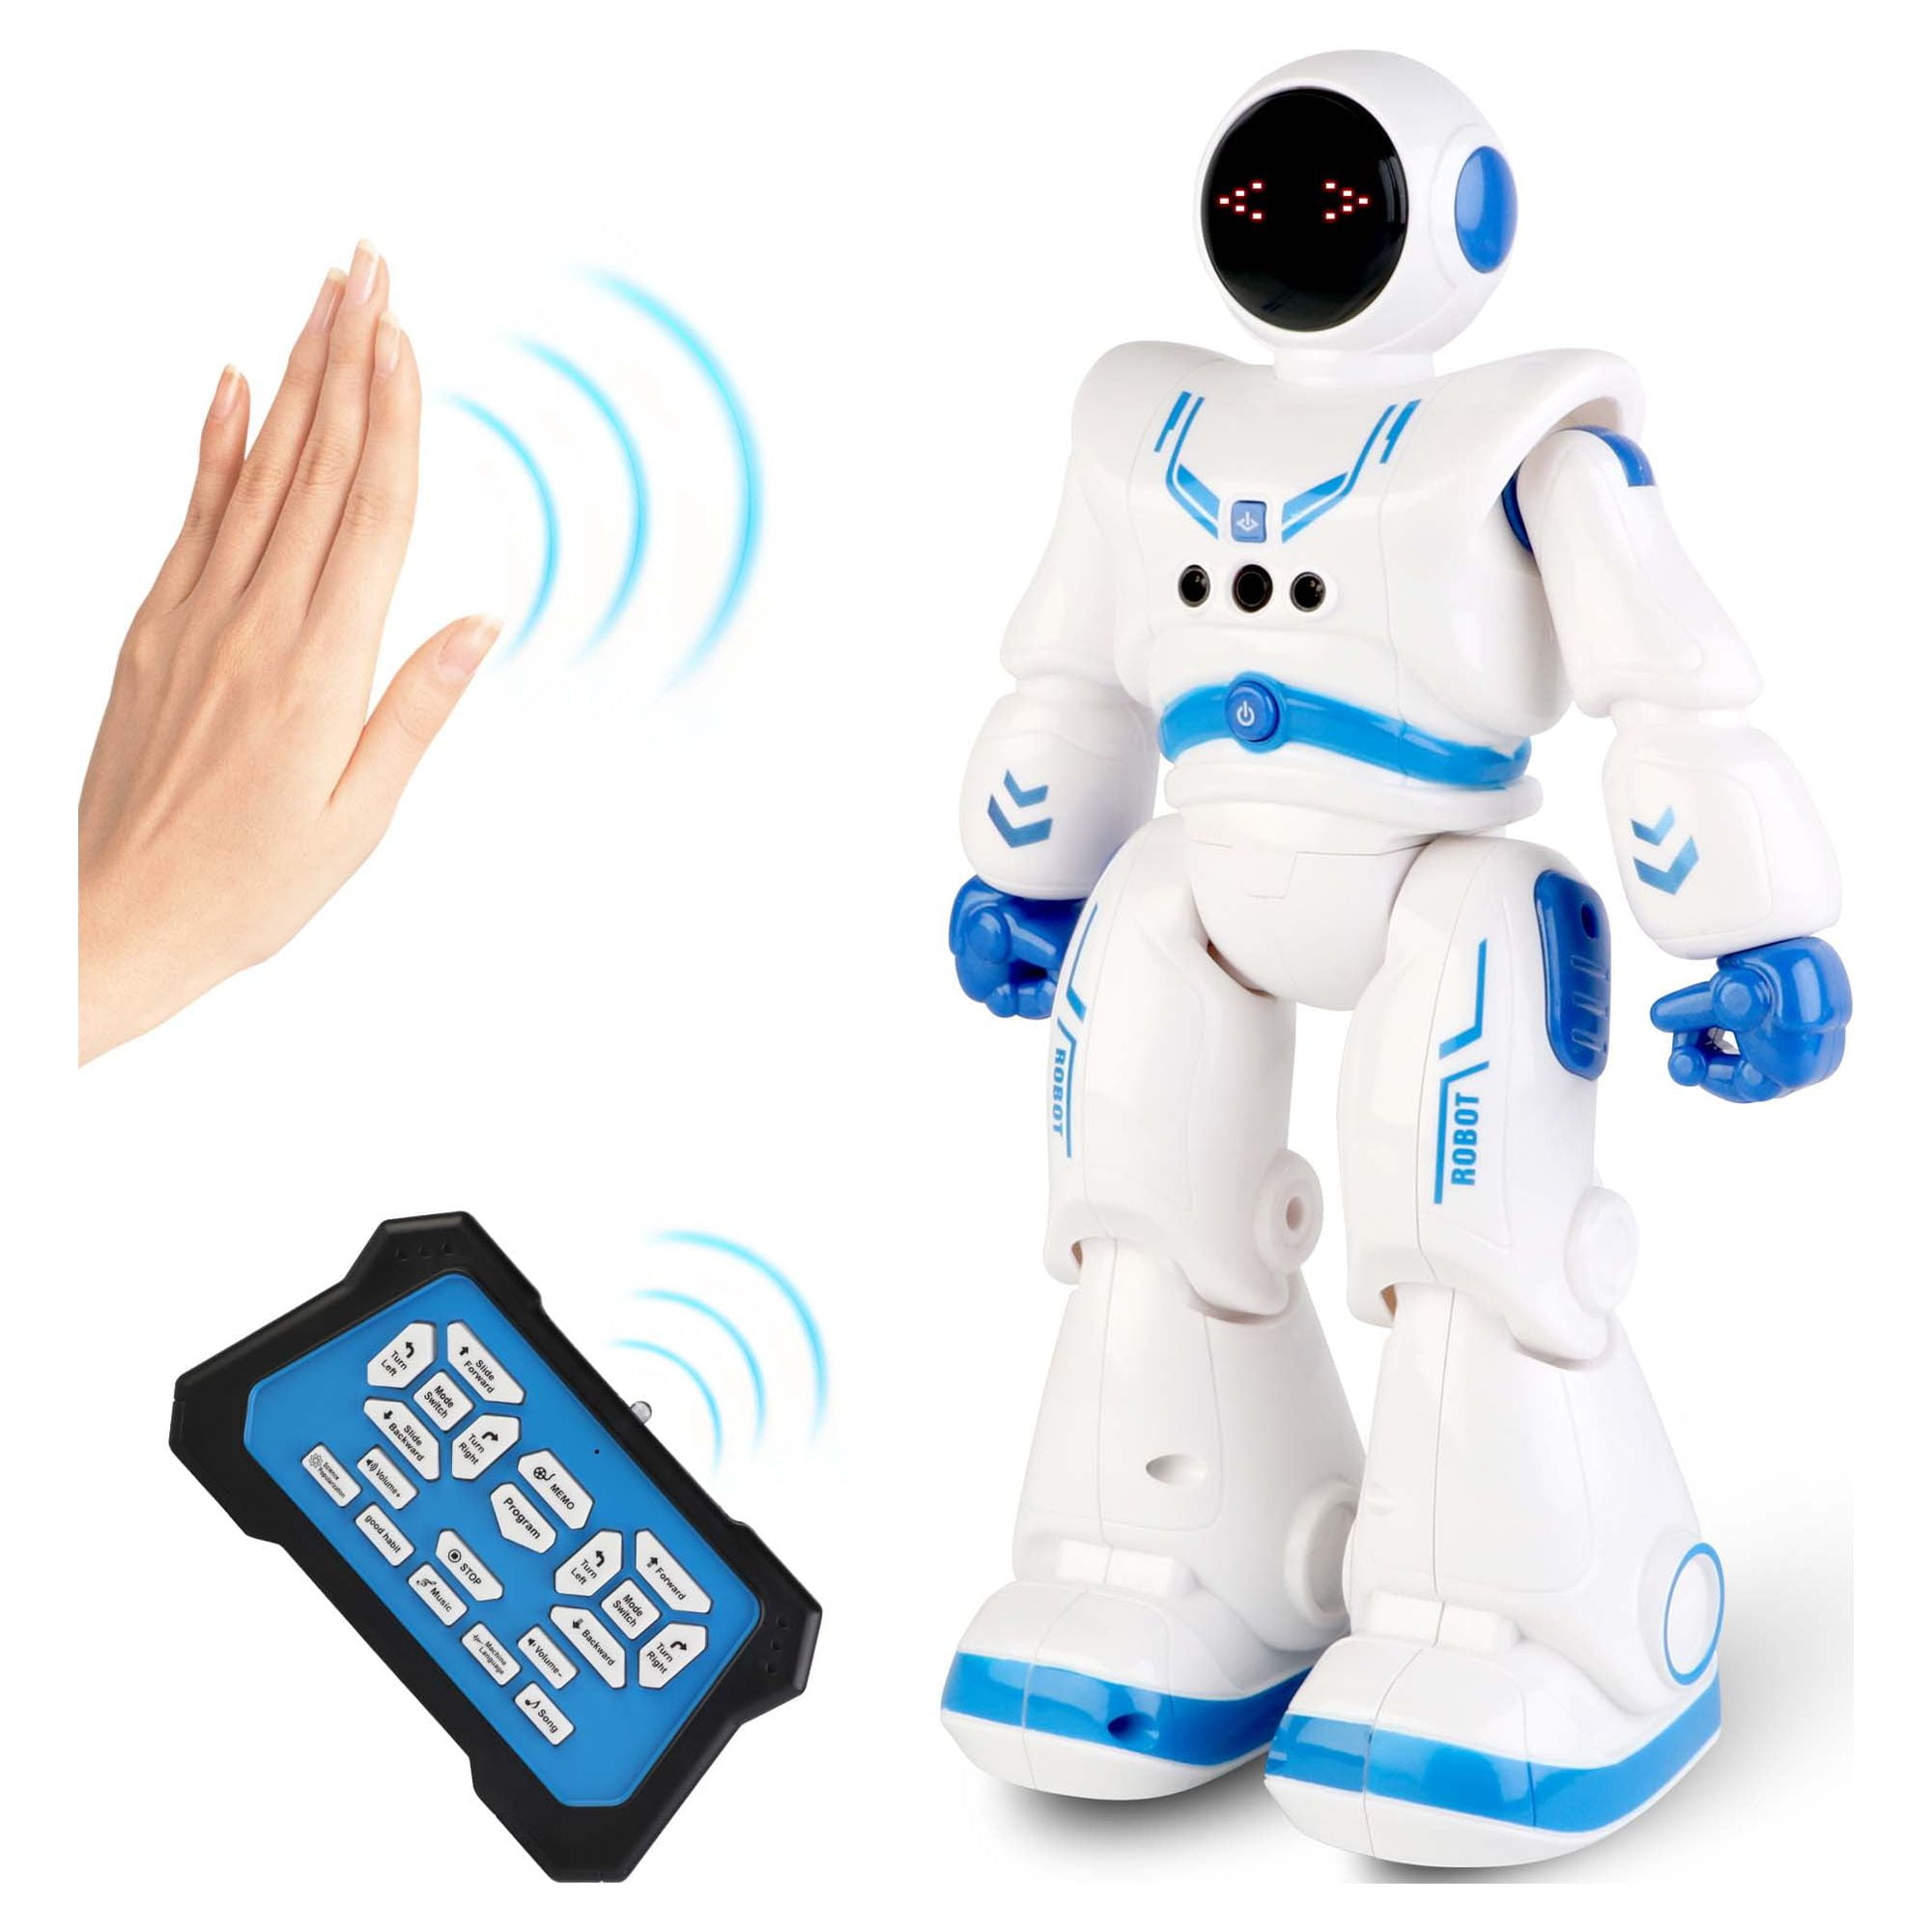 The 9 Best Robot Toys for Kids in 2023 - Remote-Control Robot Toys